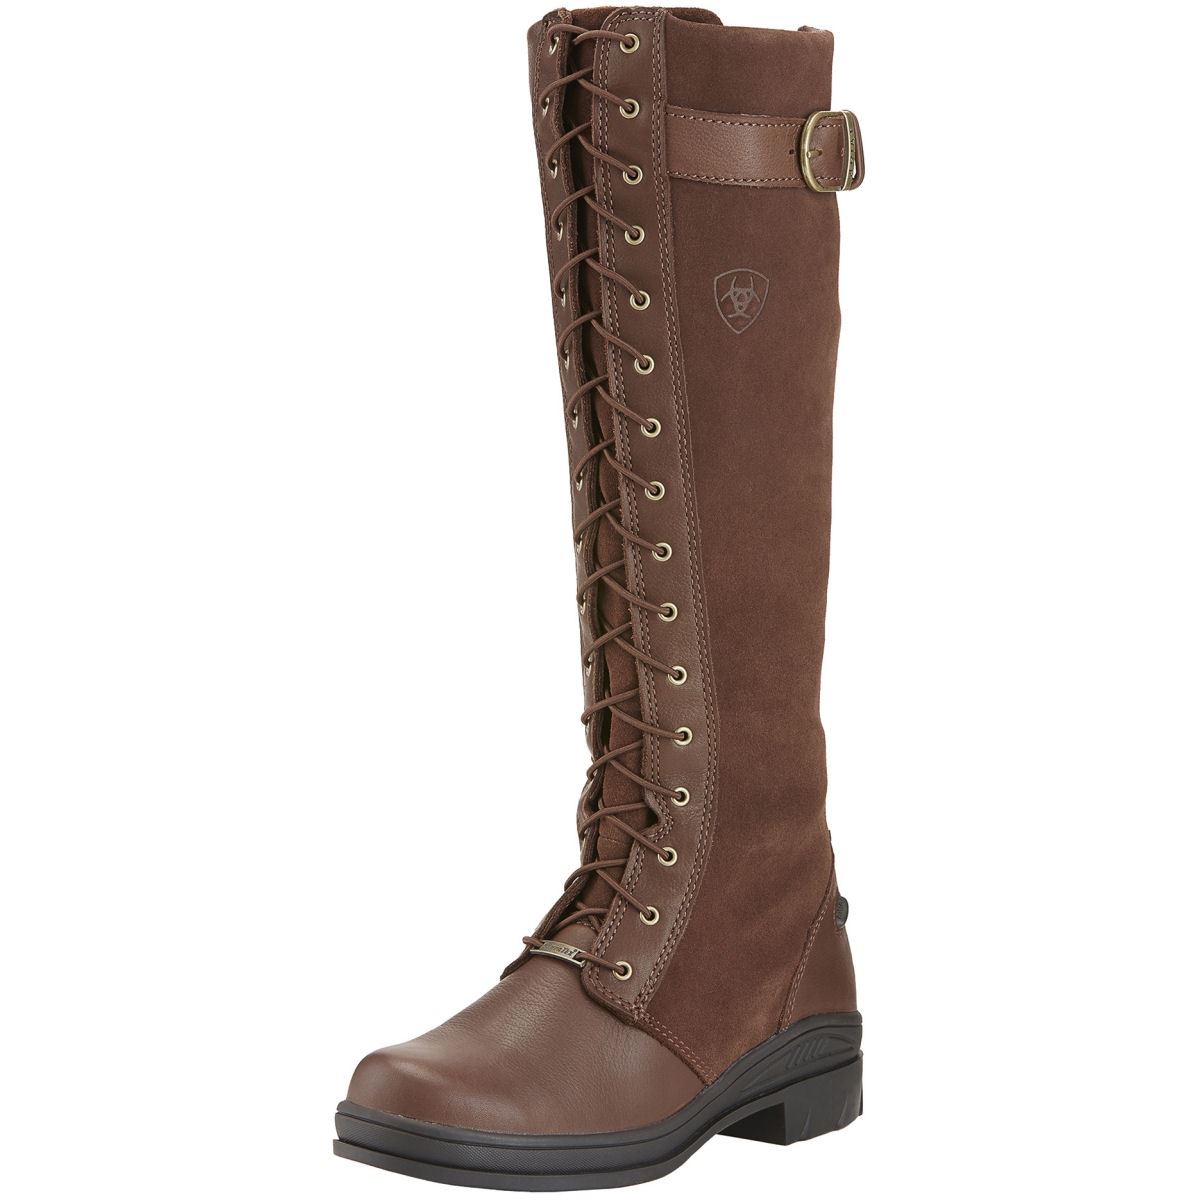 Ariat Coniston H2O Boots Questions & Answers